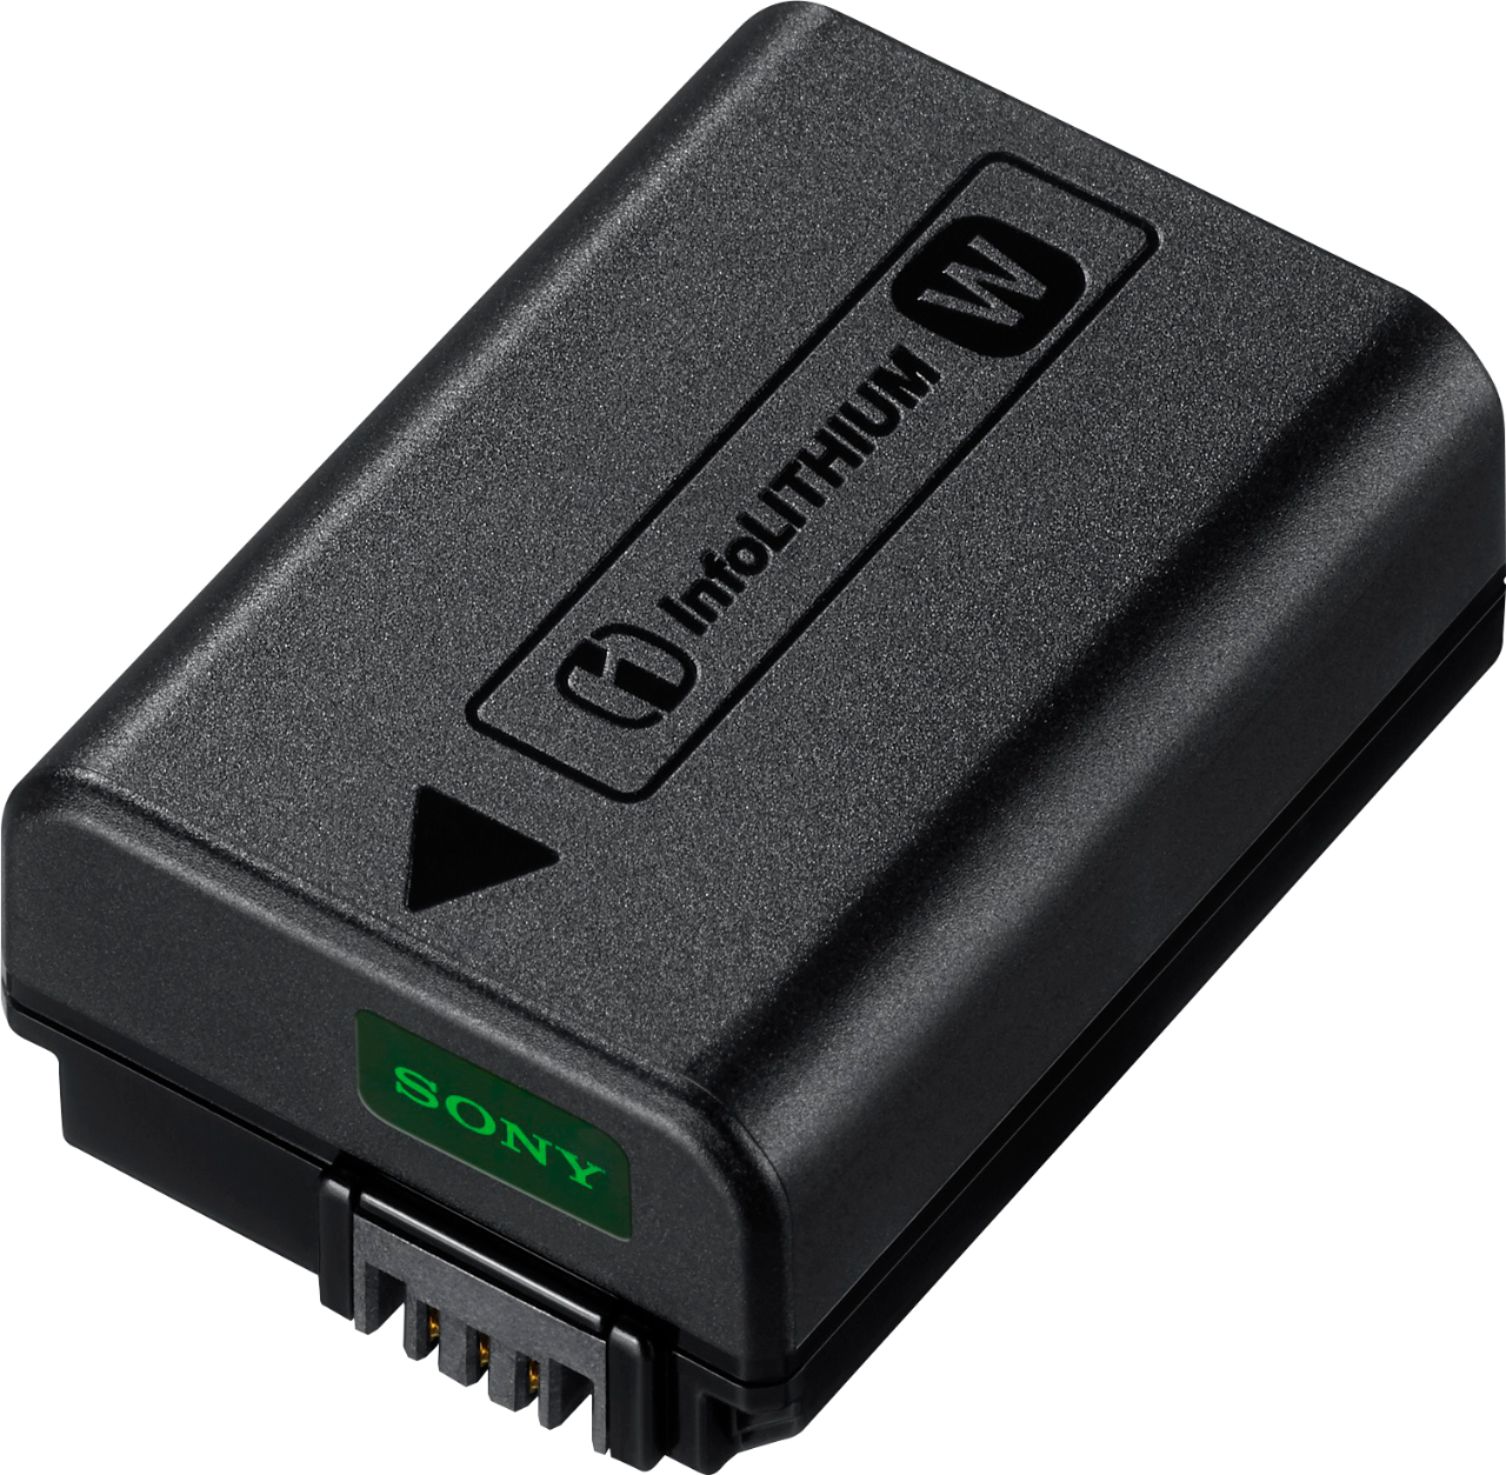 Rechargeable NP-FW50 Li-Ion Battery Pack For Sony DSC-RX10 IV M4 